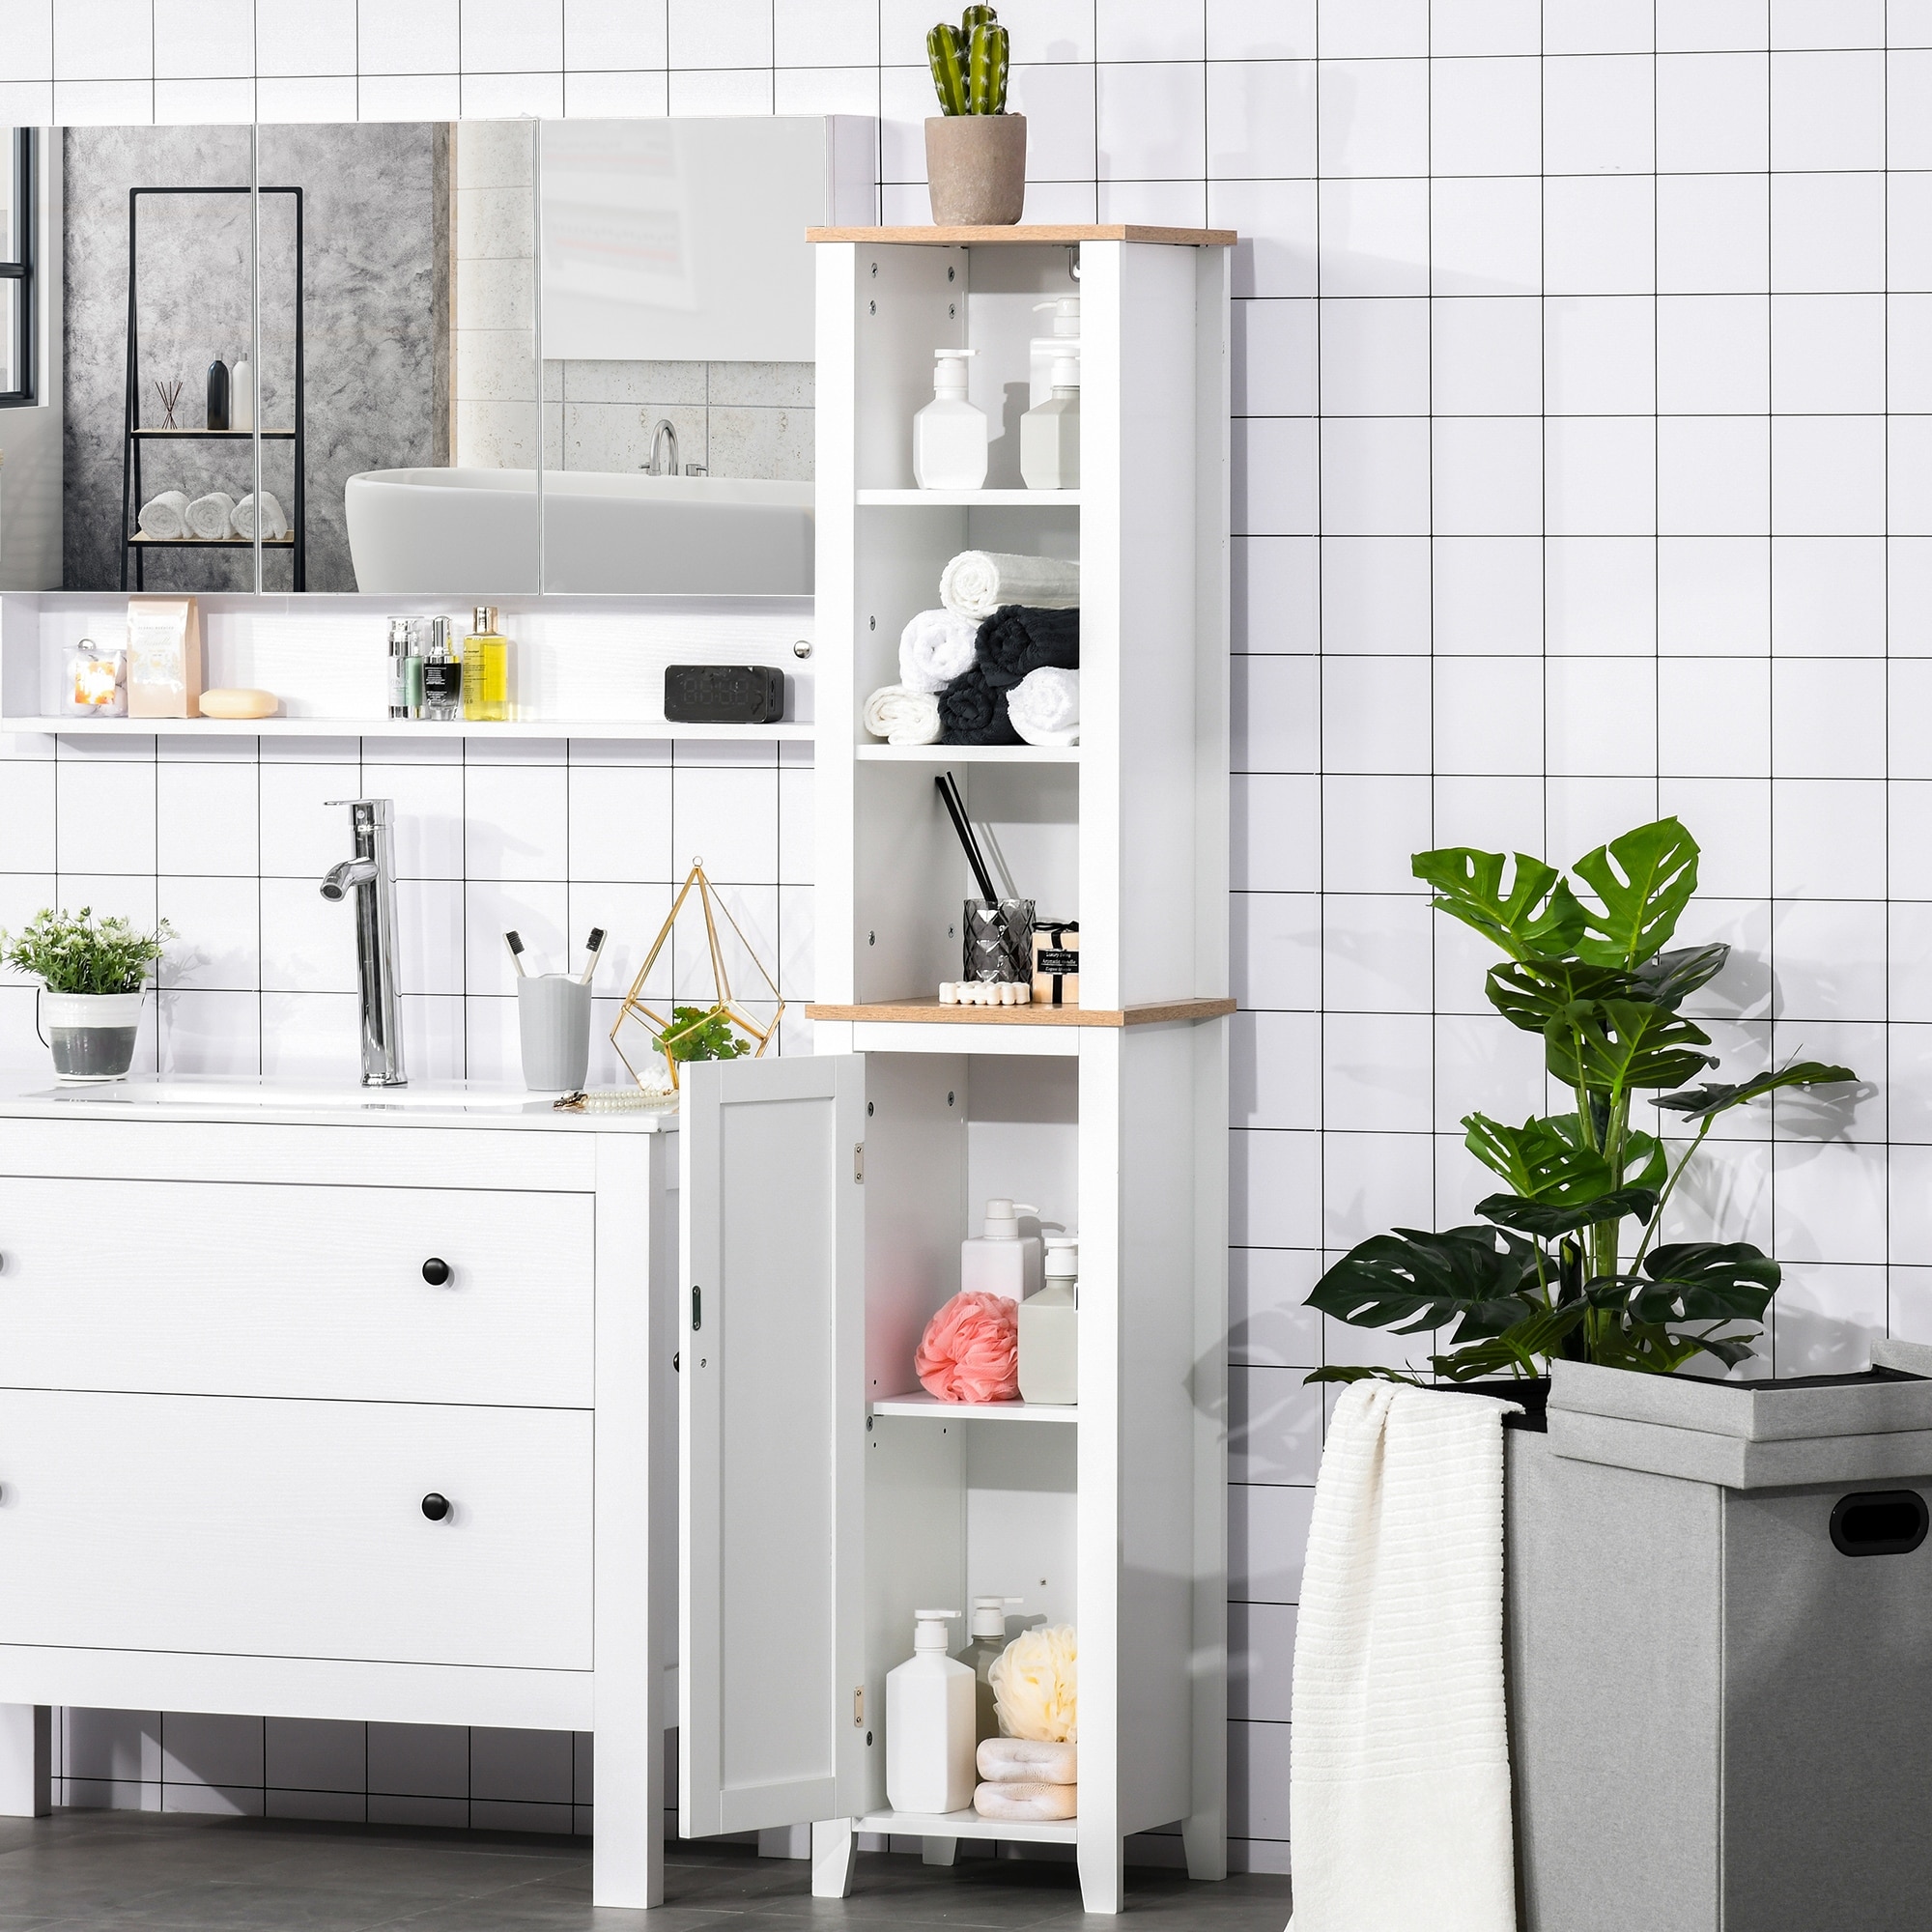 https://ak1.ostkcdn.com/images/products/is/images/direct/d1538d9c05d0866c6dd26f7b41300b22f1e11b99/Kleankin-Bathroom-Storage-Cabinet-with-3-Tier-Adjustable-Shelf-Storage-Linen-Tower-Enclosed-Cabinet%2C-White.jpg